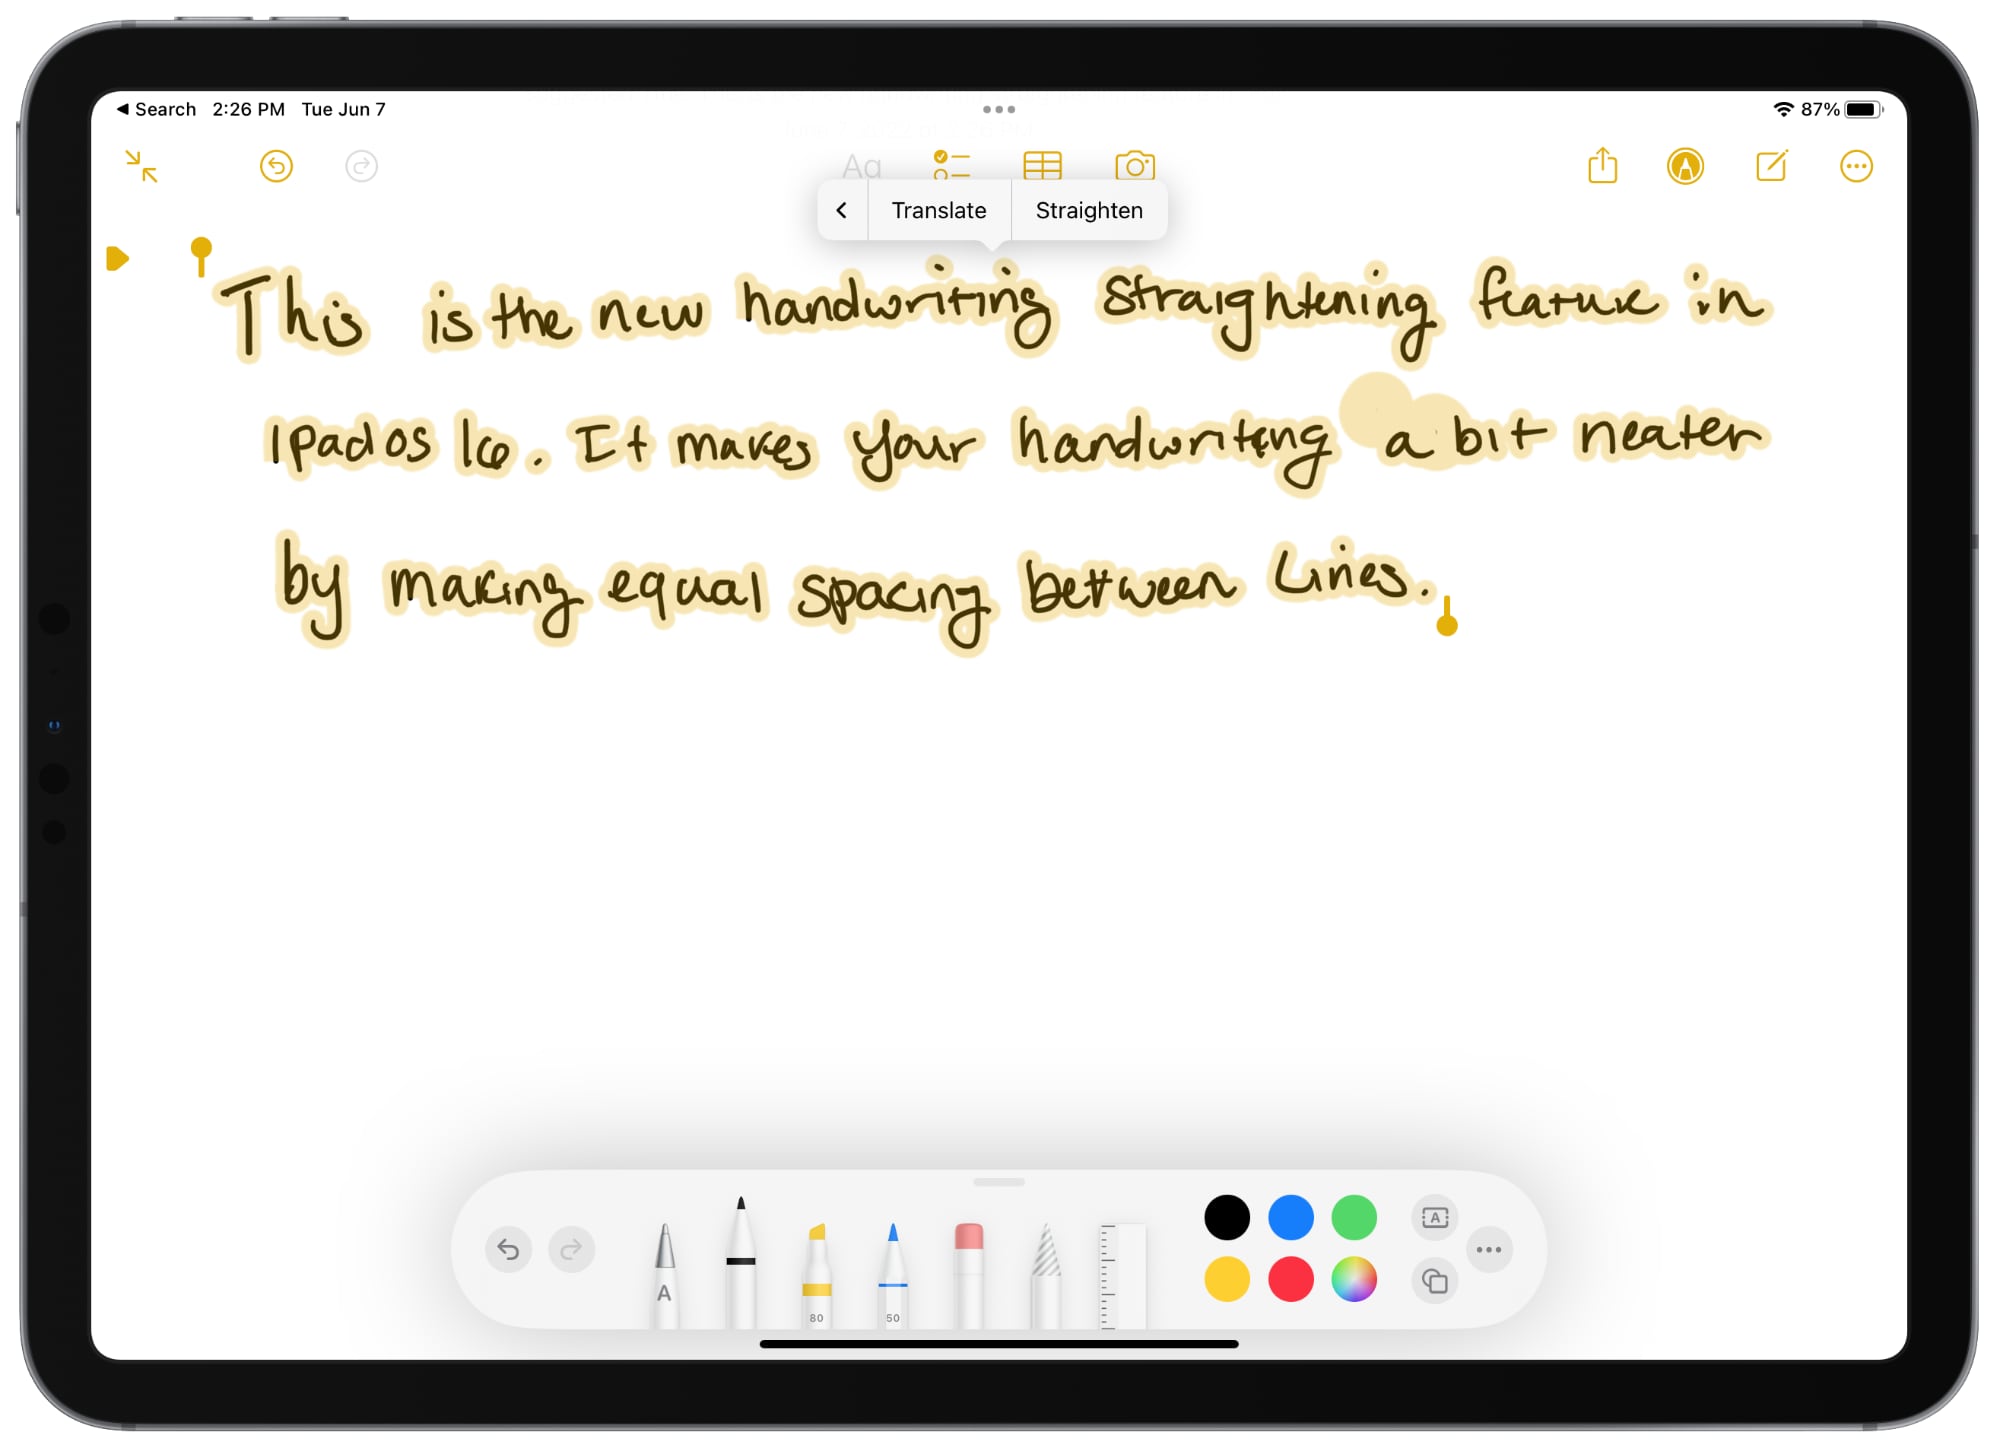 iPadOS 16 Adds Handwriting Straightening Feature to Make Your Writing Neater